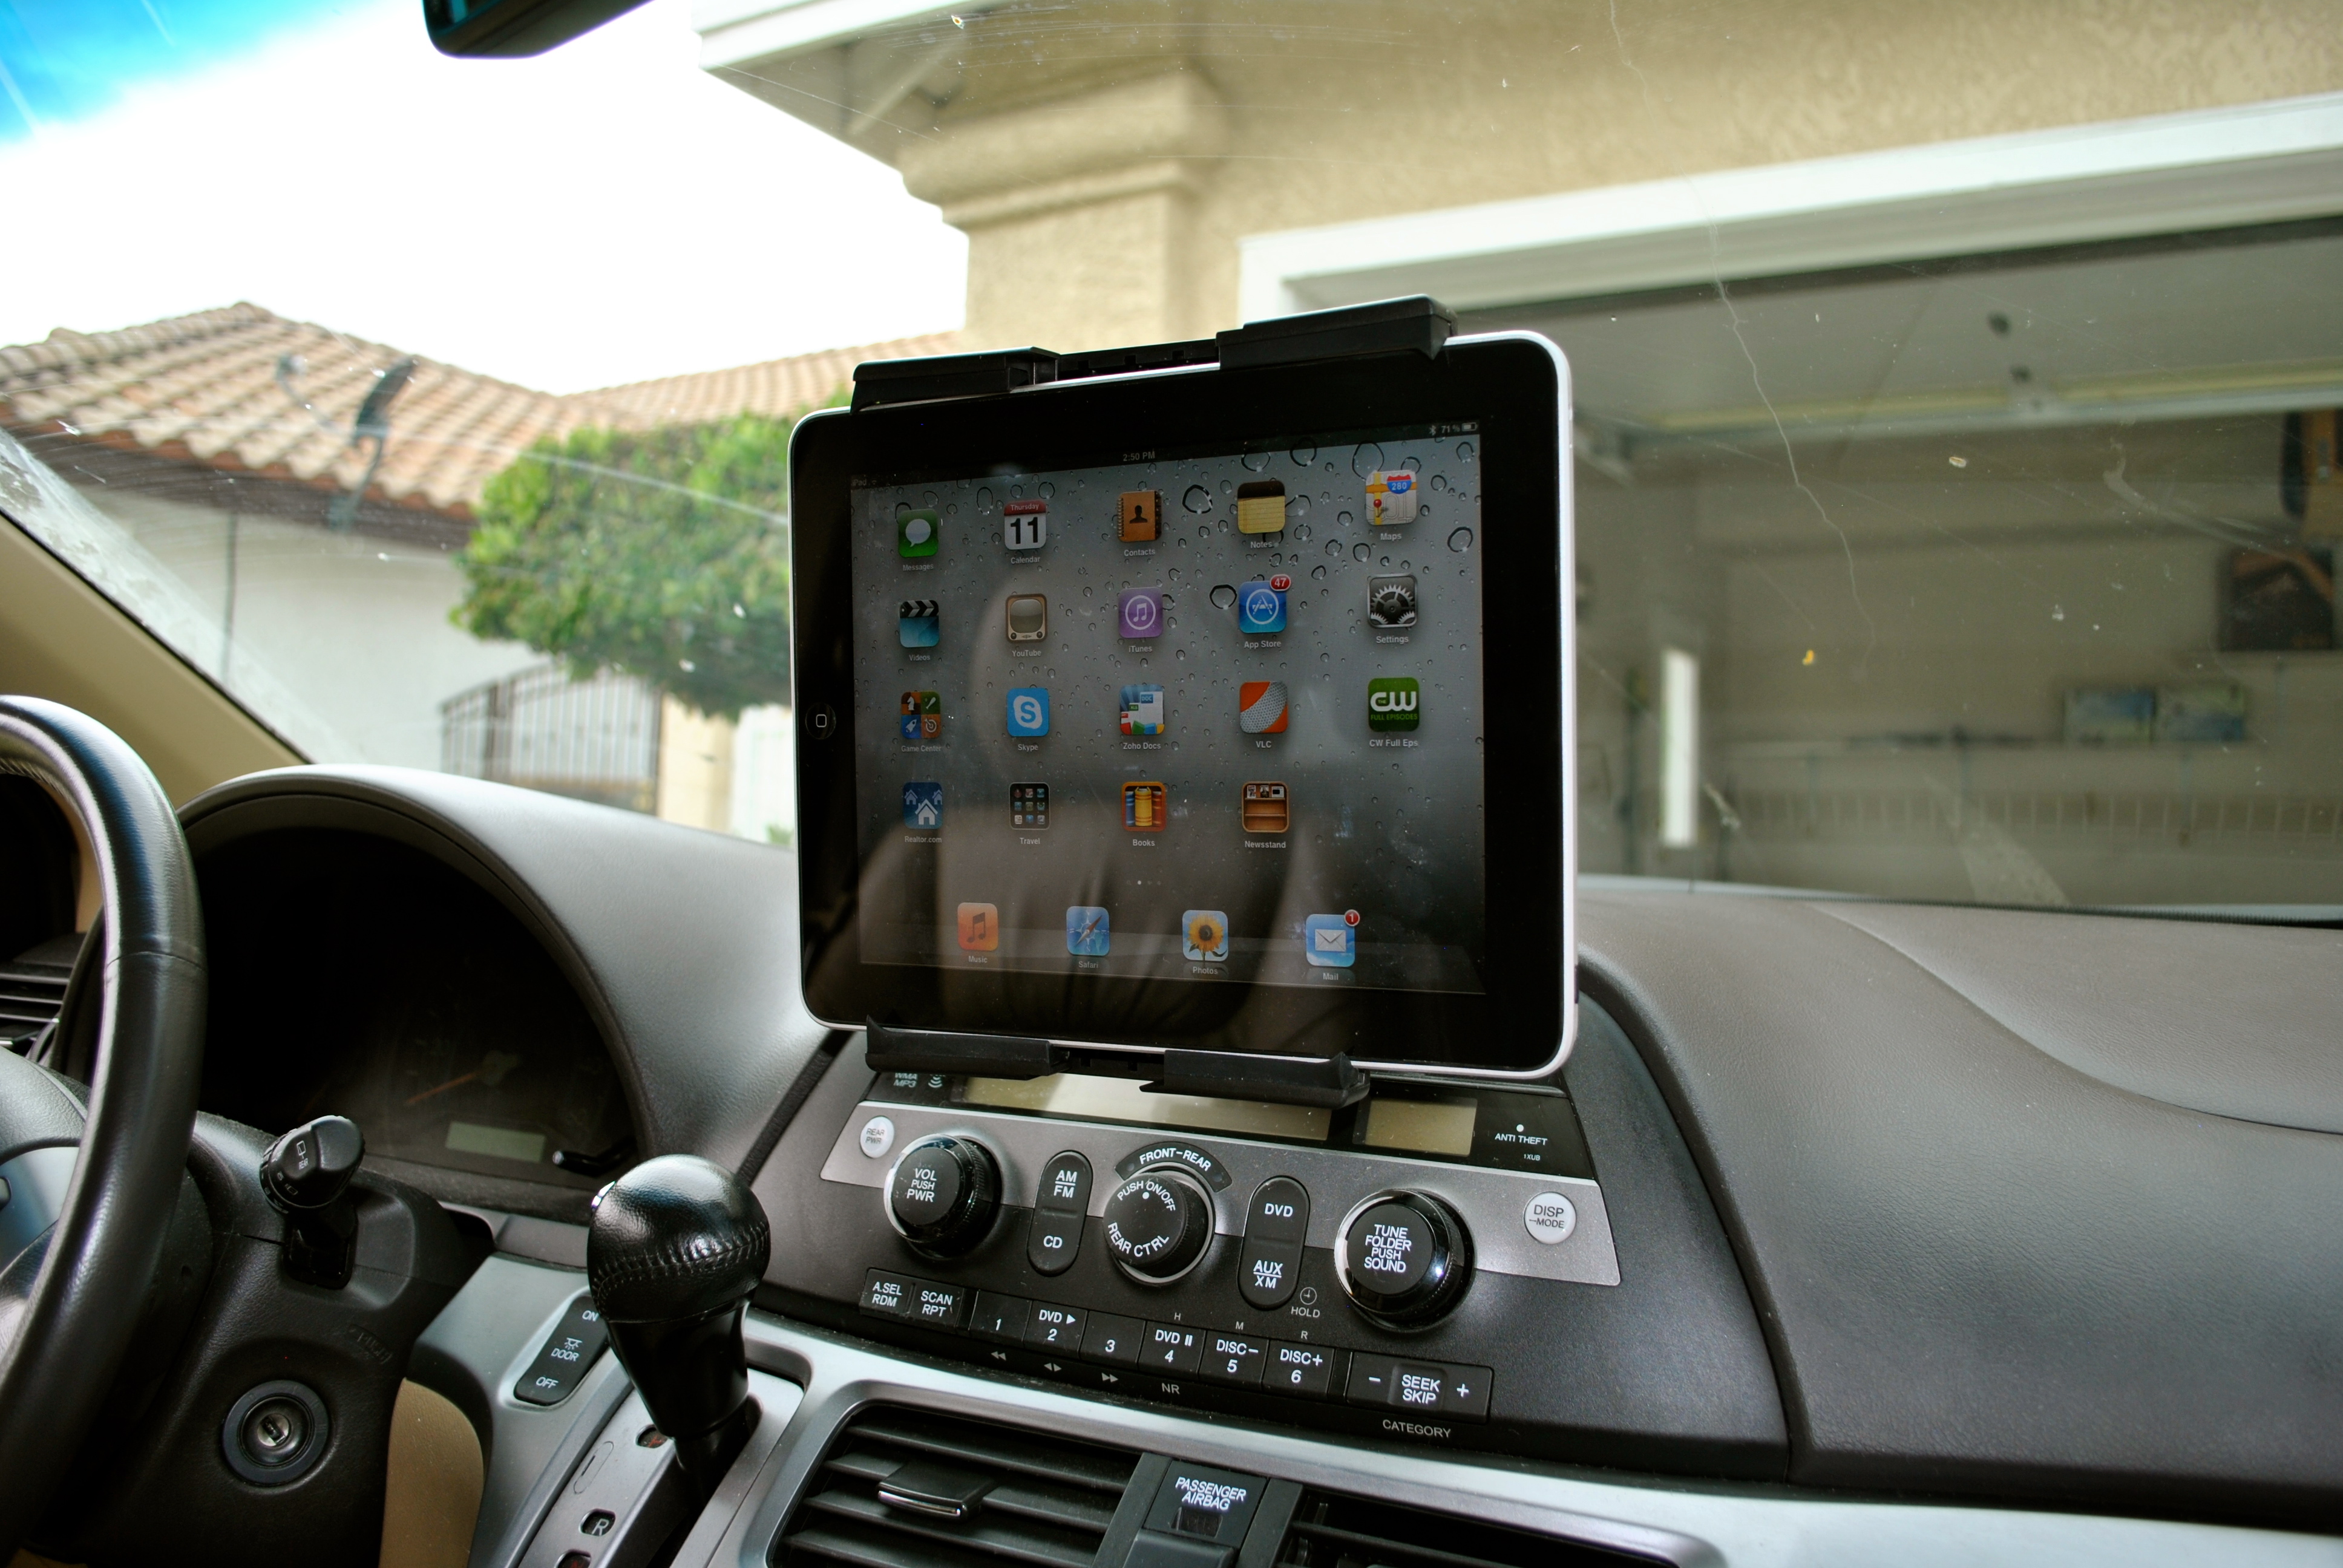 ipad dashboard mount tablet holder smartphone mobotron phone 700v dm smart tab tablets note samsung microsoft surface electronic nexus galaxy